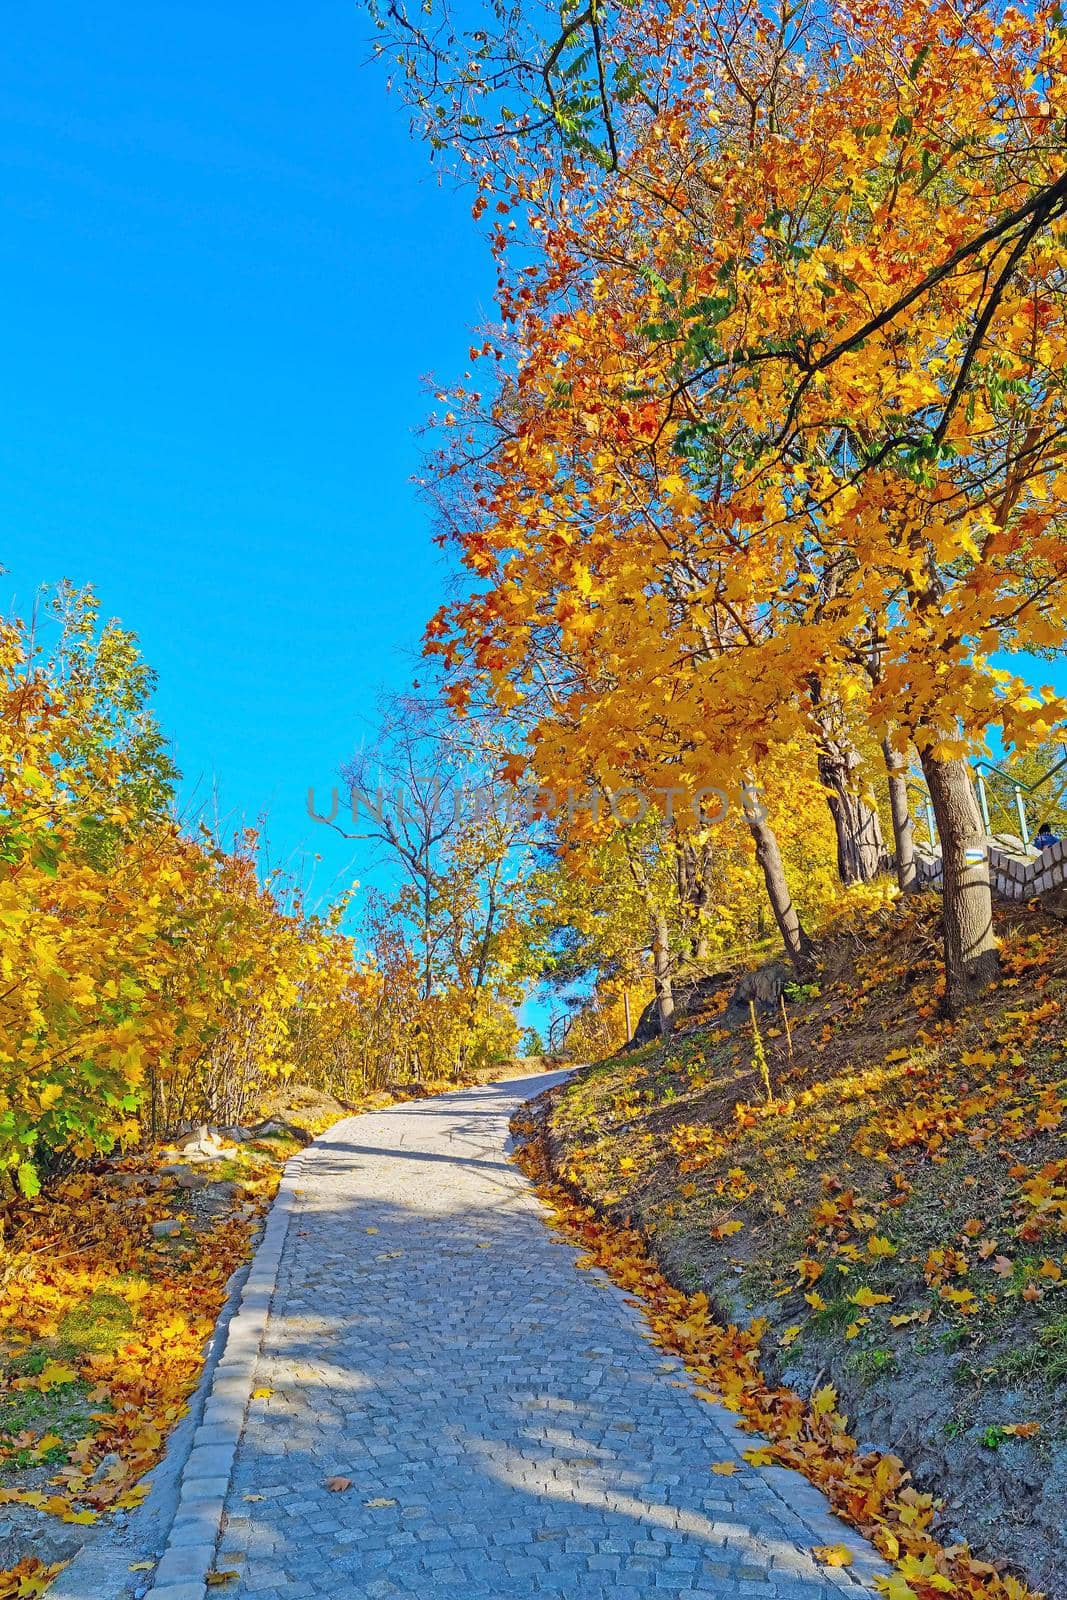 A beautiful scenic trail in the park for a stroll on a sunny autumn day